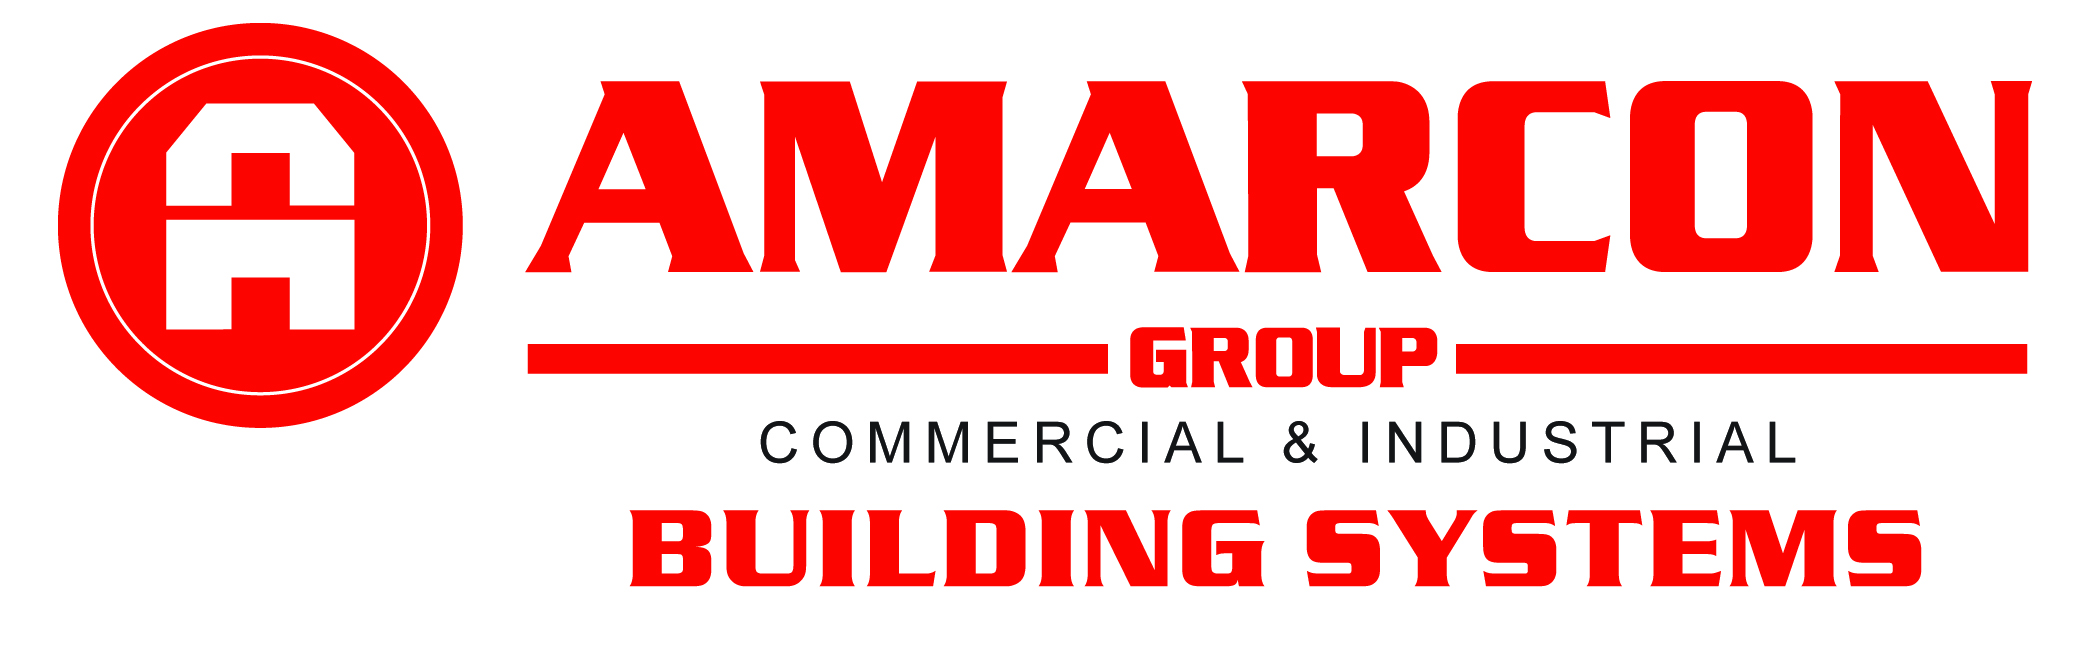 Amarcon Group